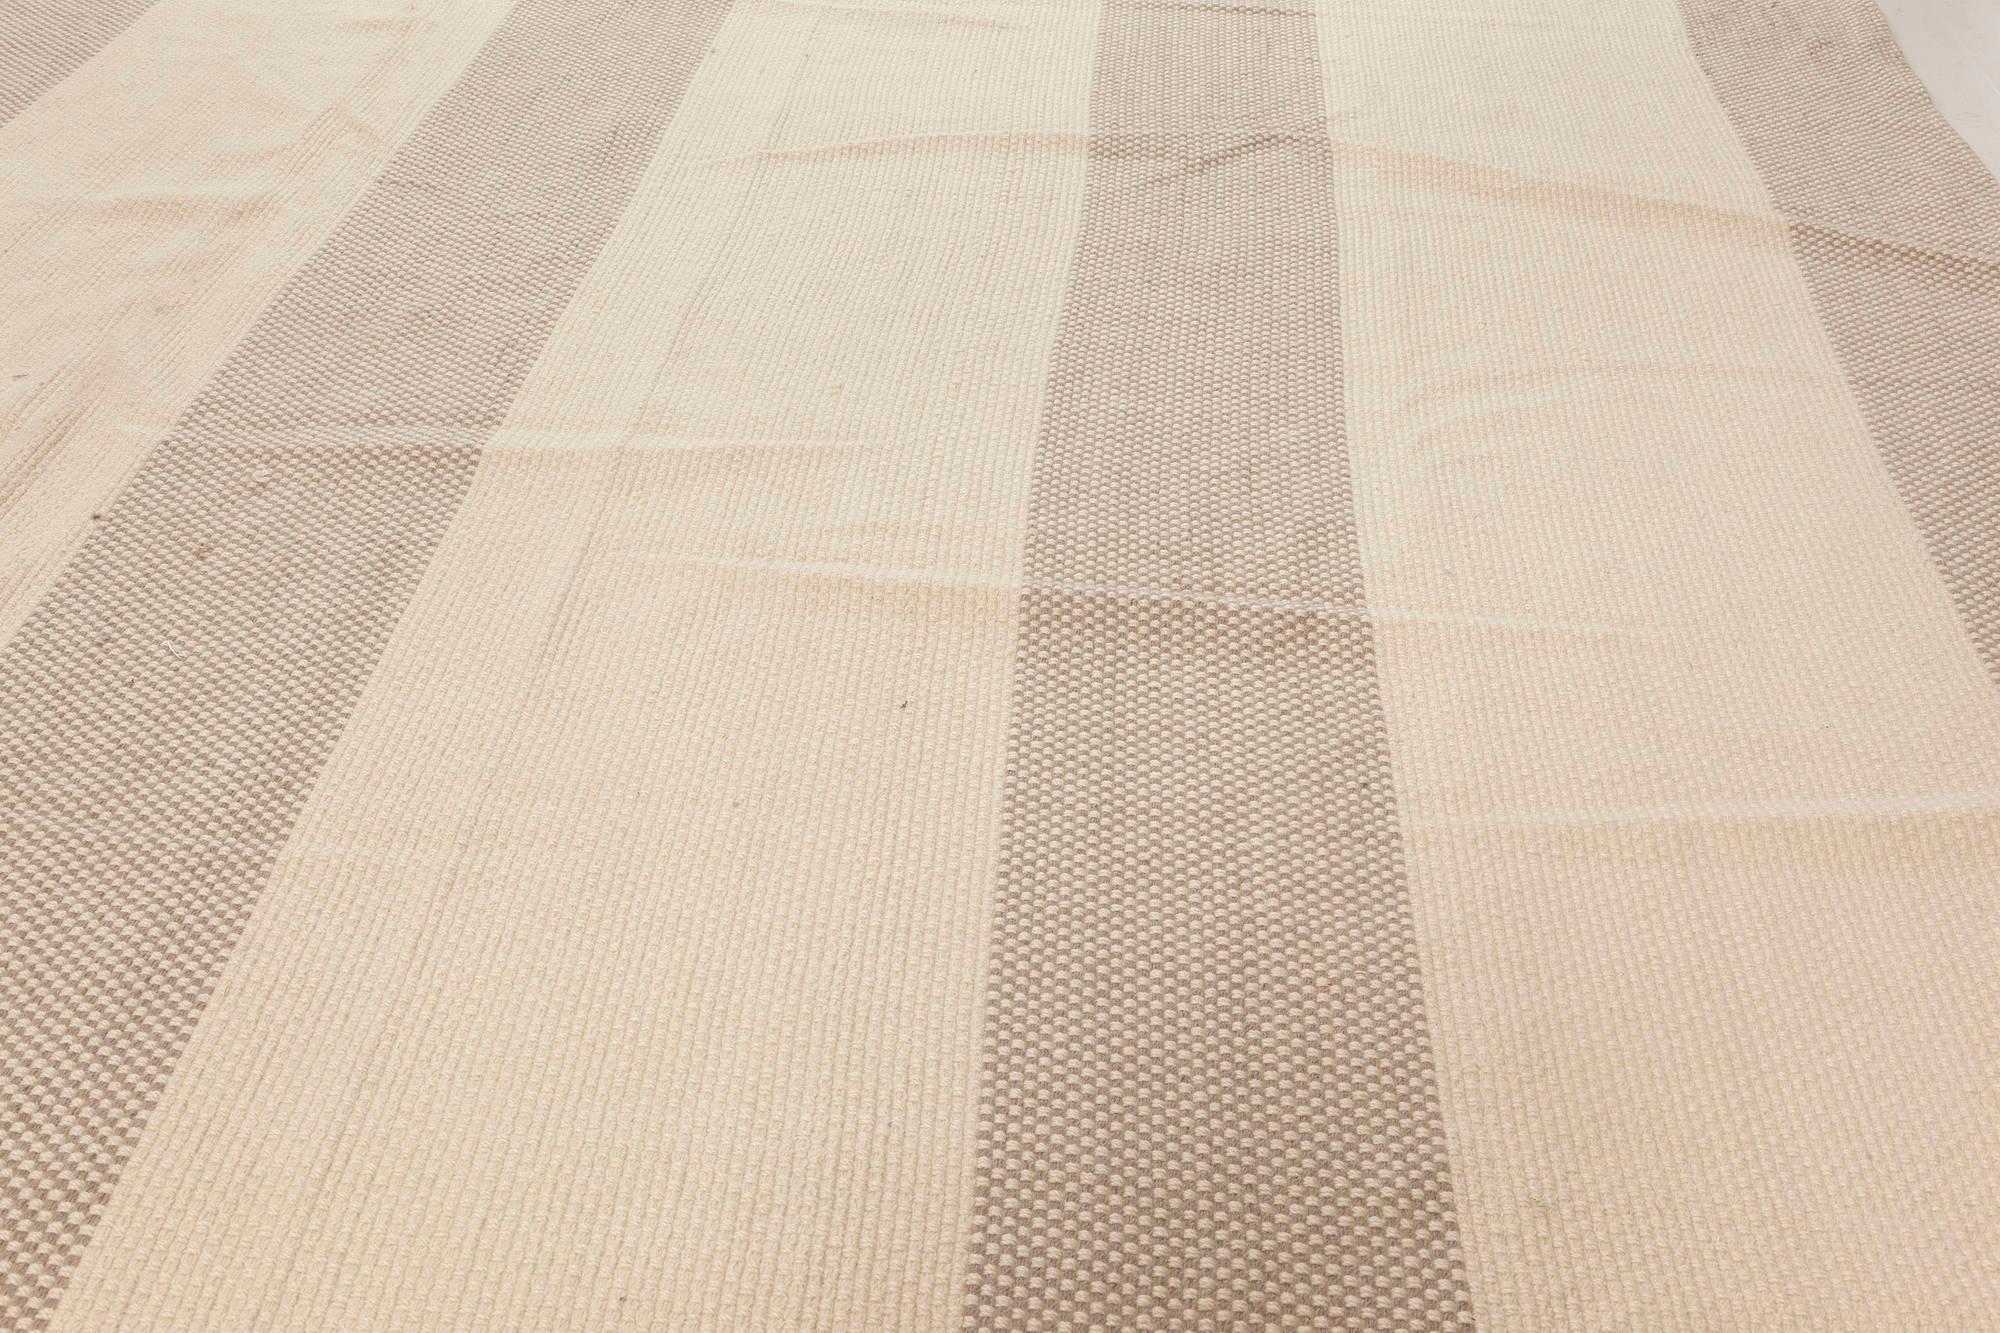 Hand-Woven Oversized Modern Striped Beige and Grey Flat-Weave Rug by Doris Leslie Blau For Sale